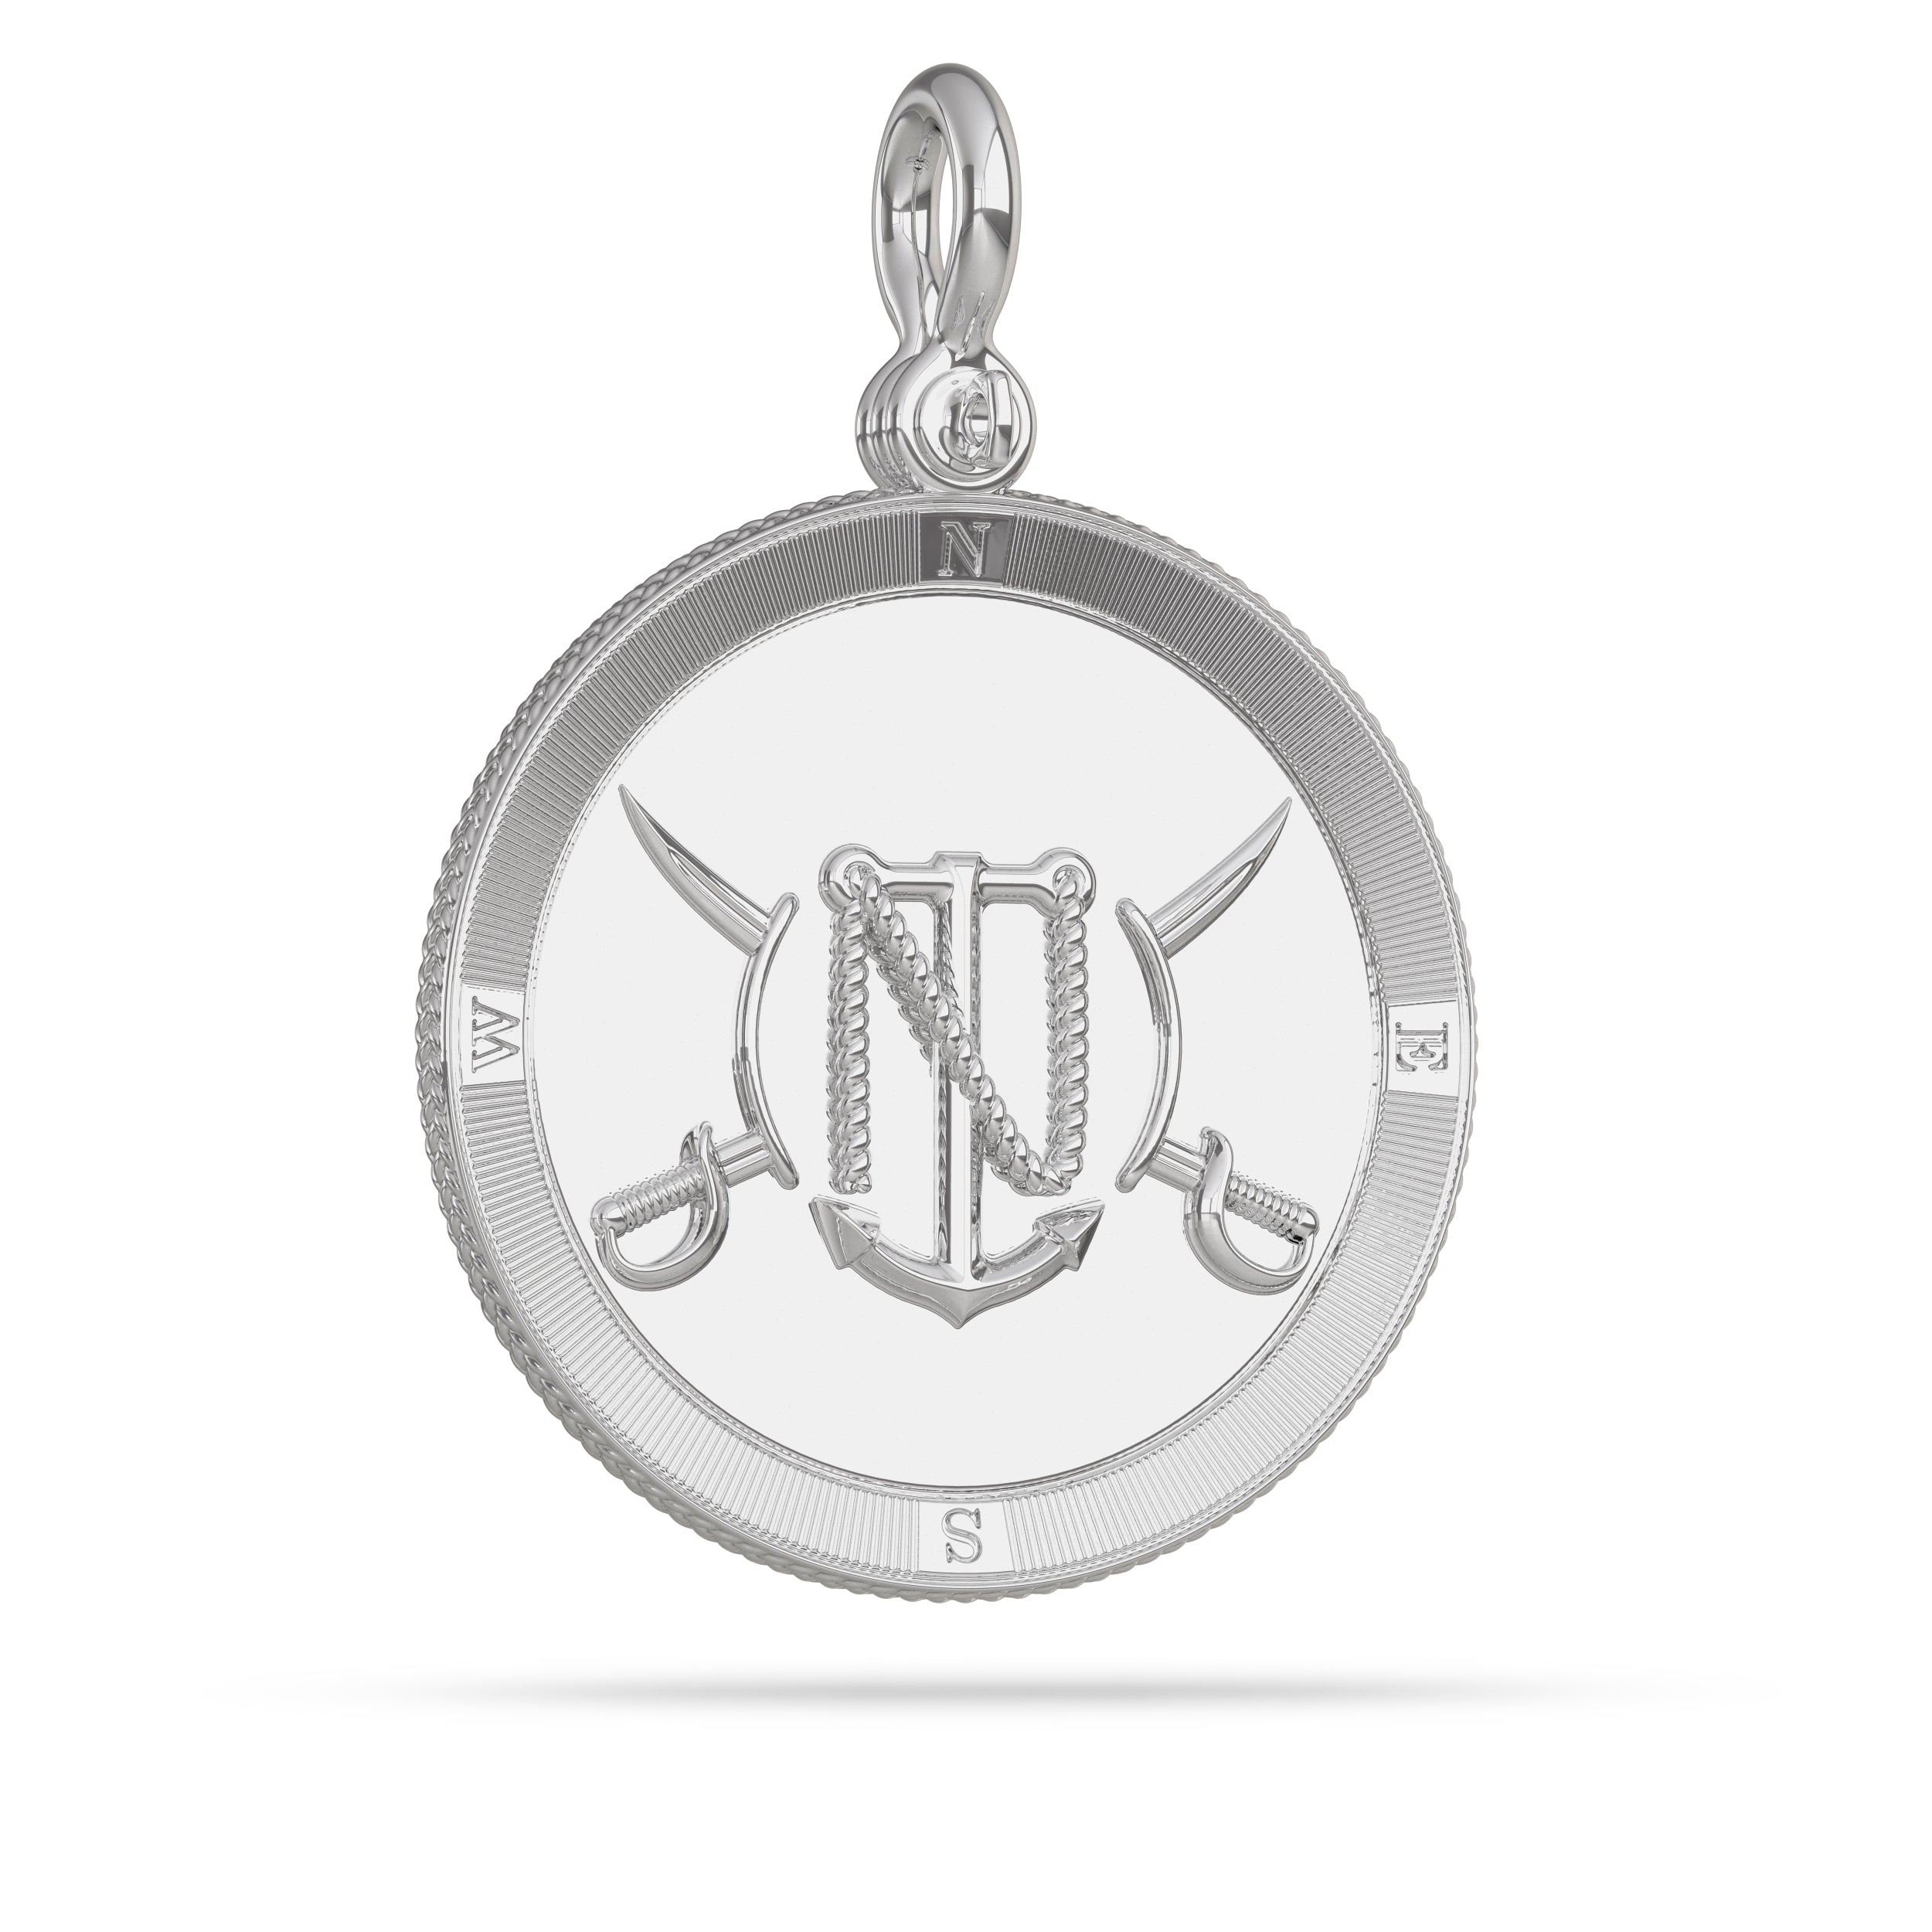 Compass Medallion Pendant Large in Sterling Silver by Nautical Treasure